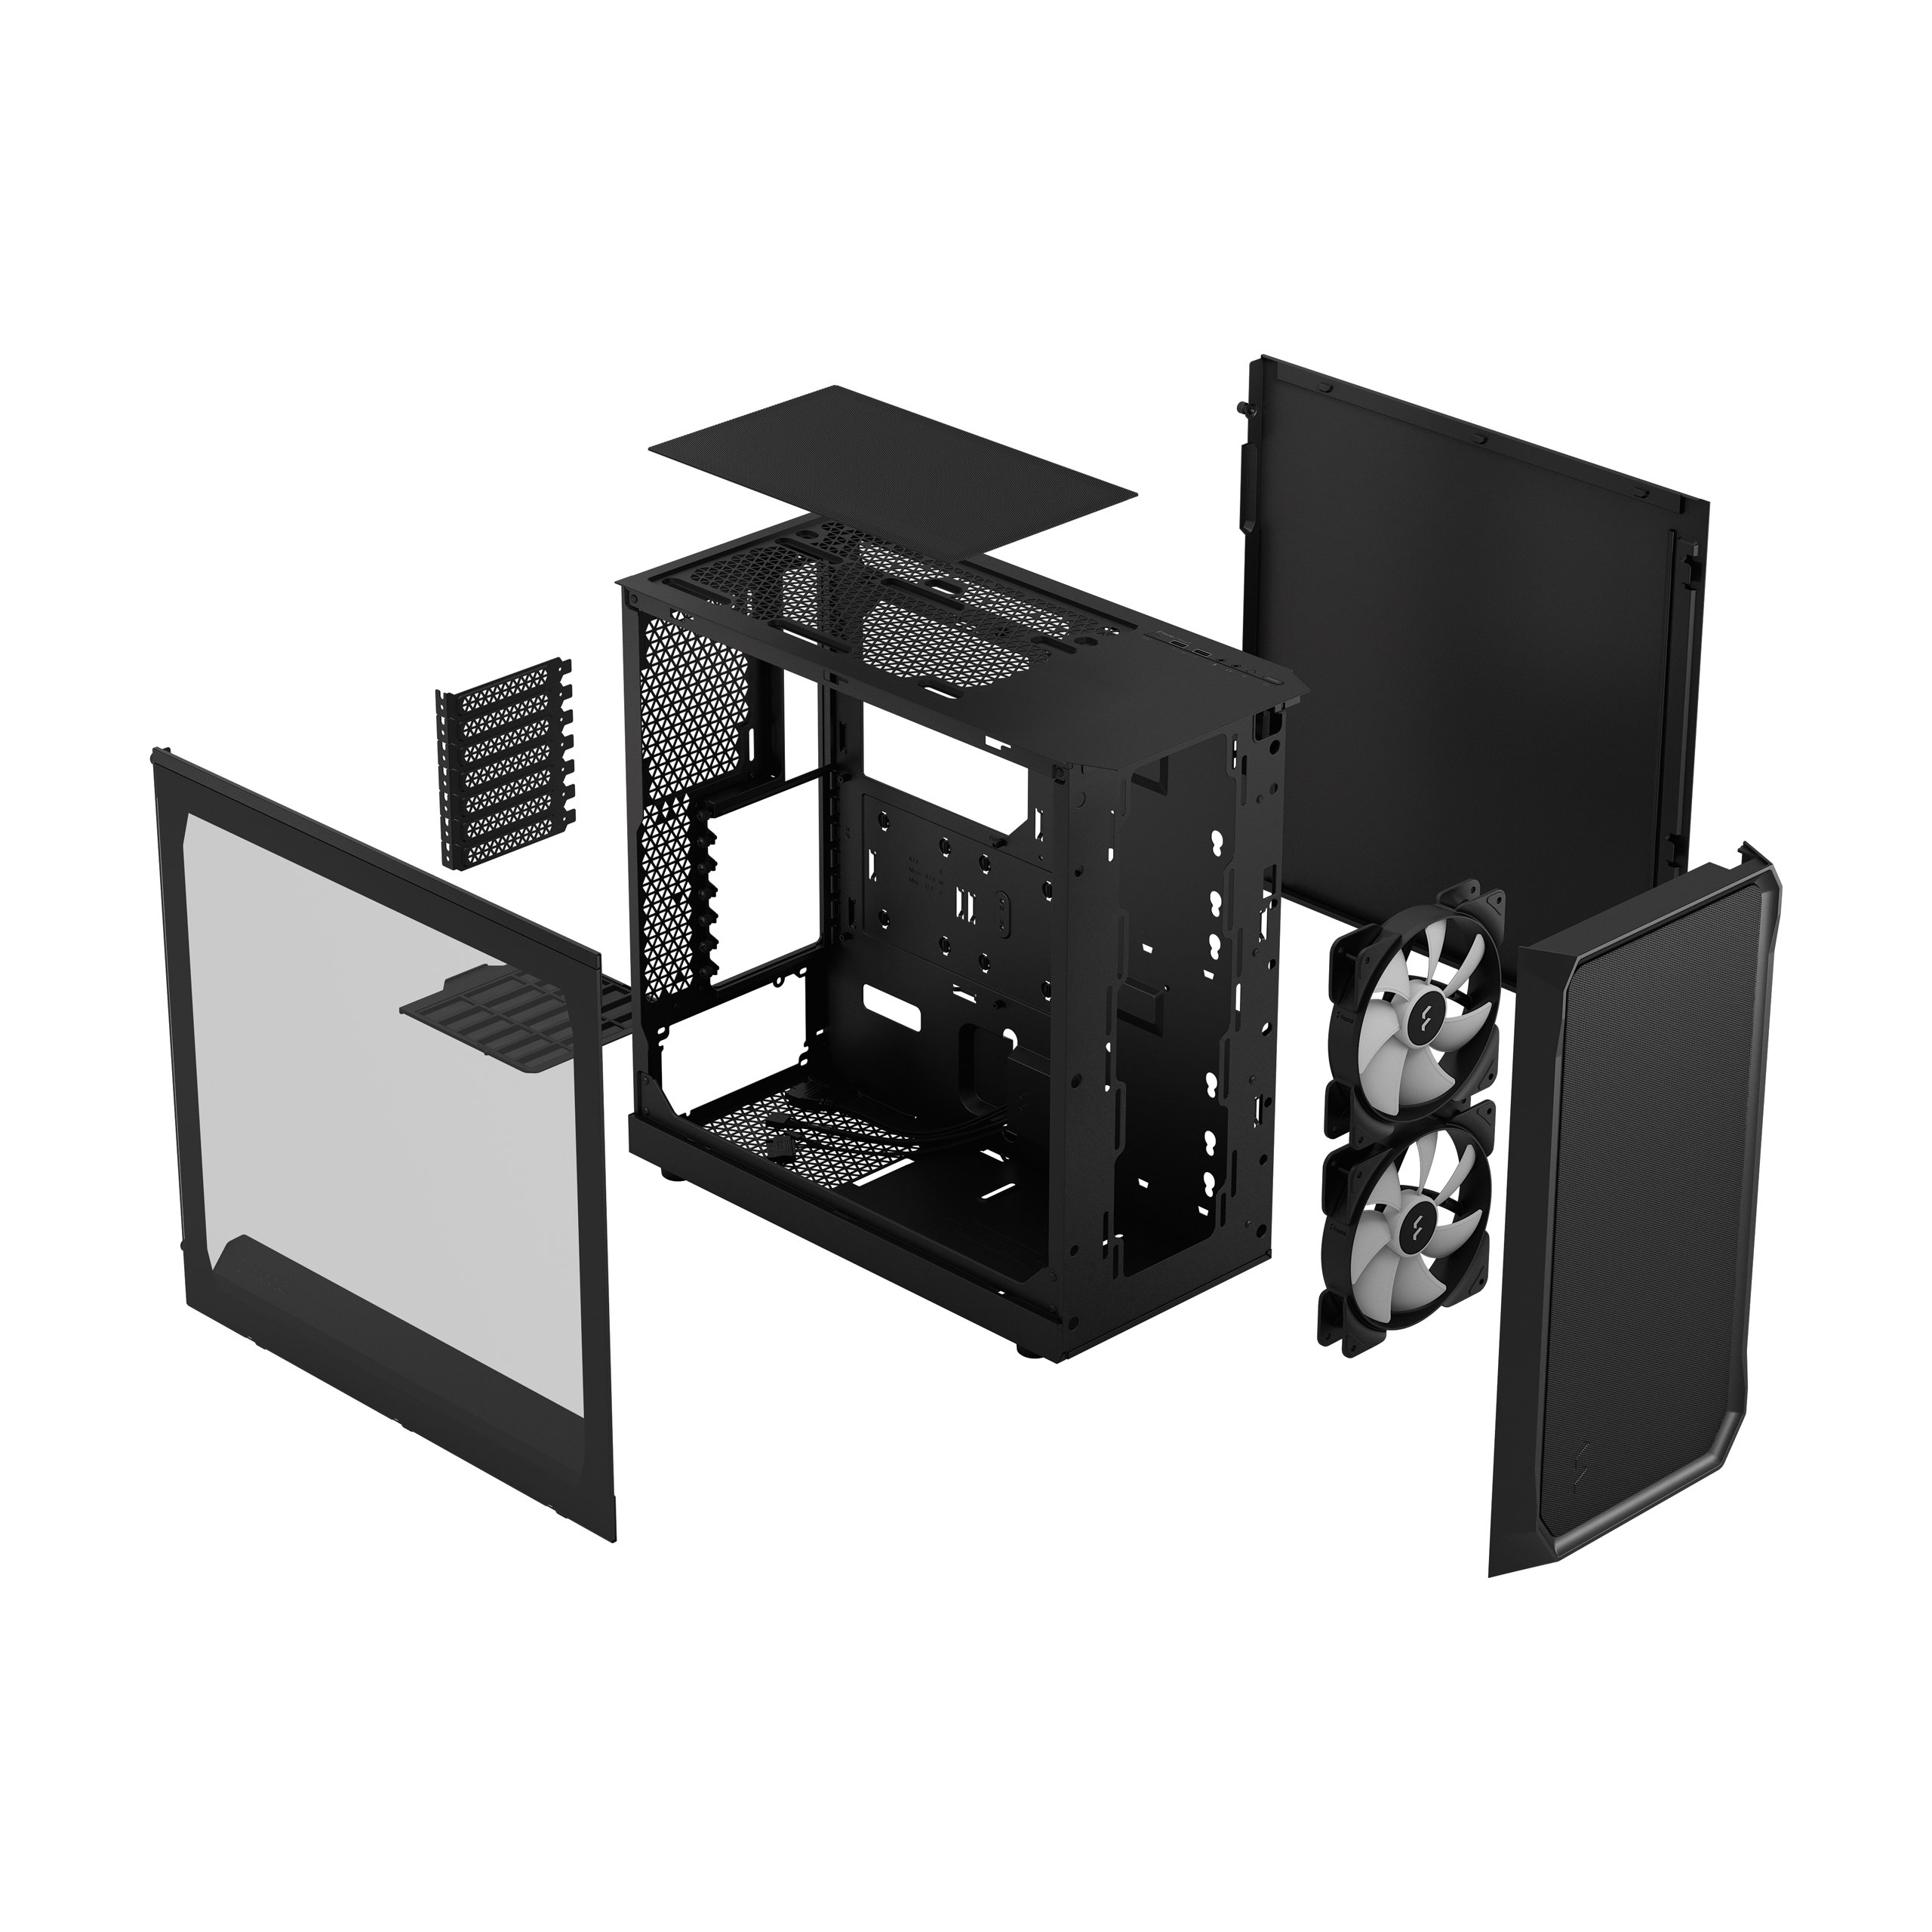 Fractal Design Focus 2 White RGB TG Clear Tint Chassis at Rs 6965